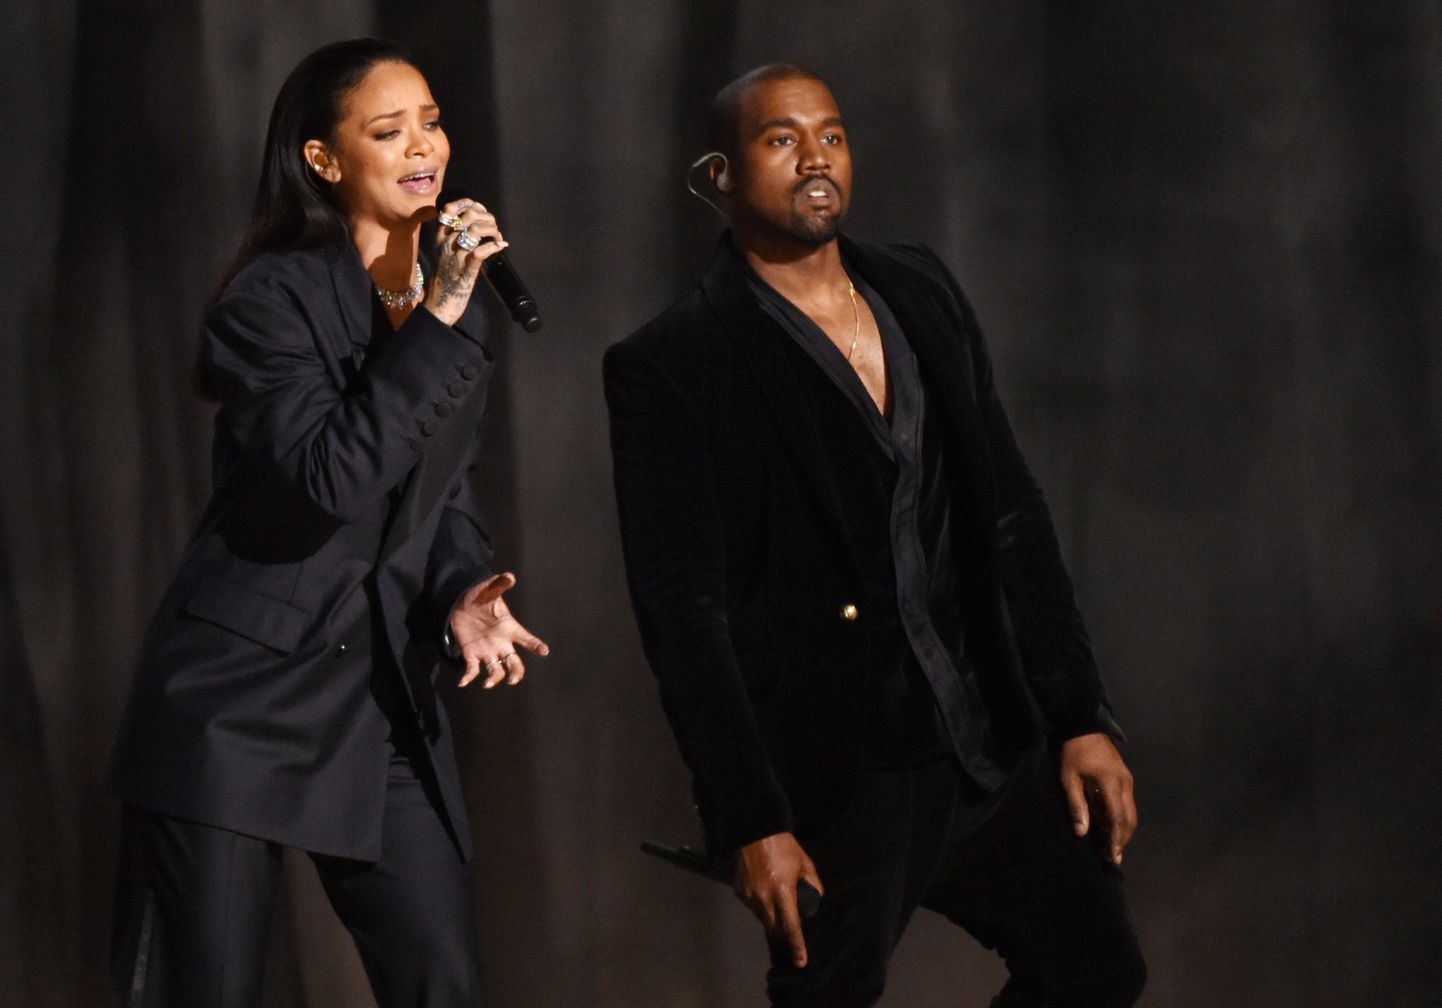 Rihanna, left, and Kanye West perform at the 57th annual Grammy Awards on Sunday, Feb. 8, 2015, in Los Angeles. (Photo by John Shearer/Invision/AP)